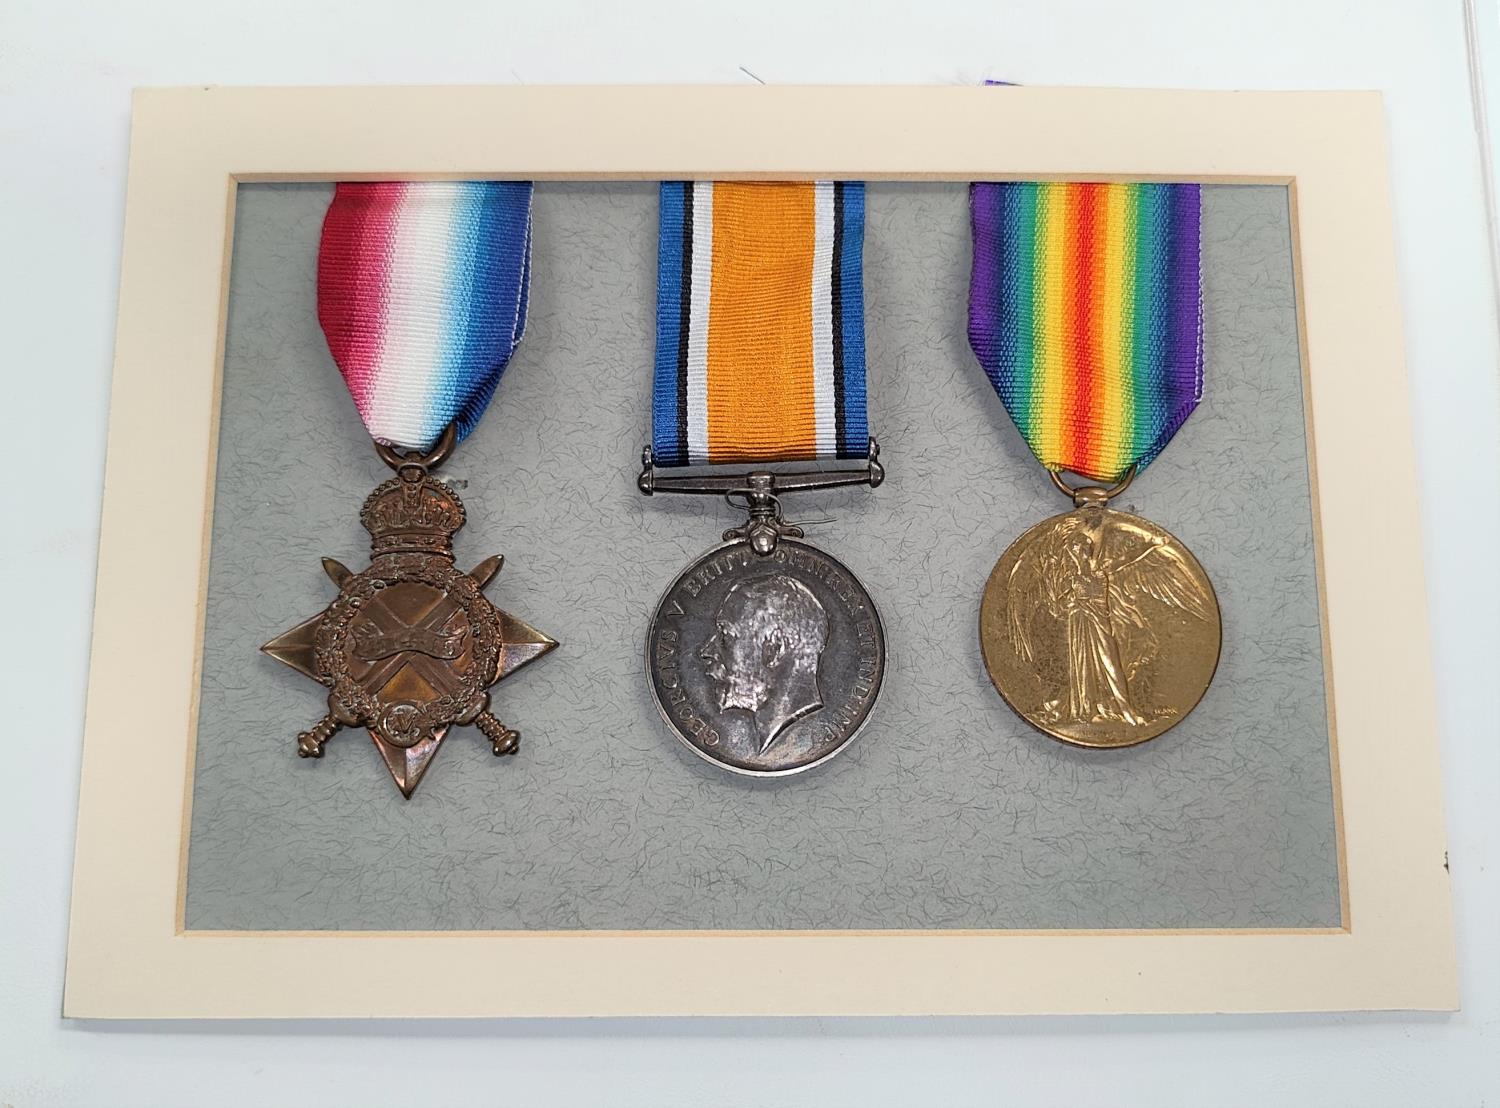 17630 Private J.E. Blears, Lancashire Fusiliers and Royal Defence Corps 1914-15 star trio, copy